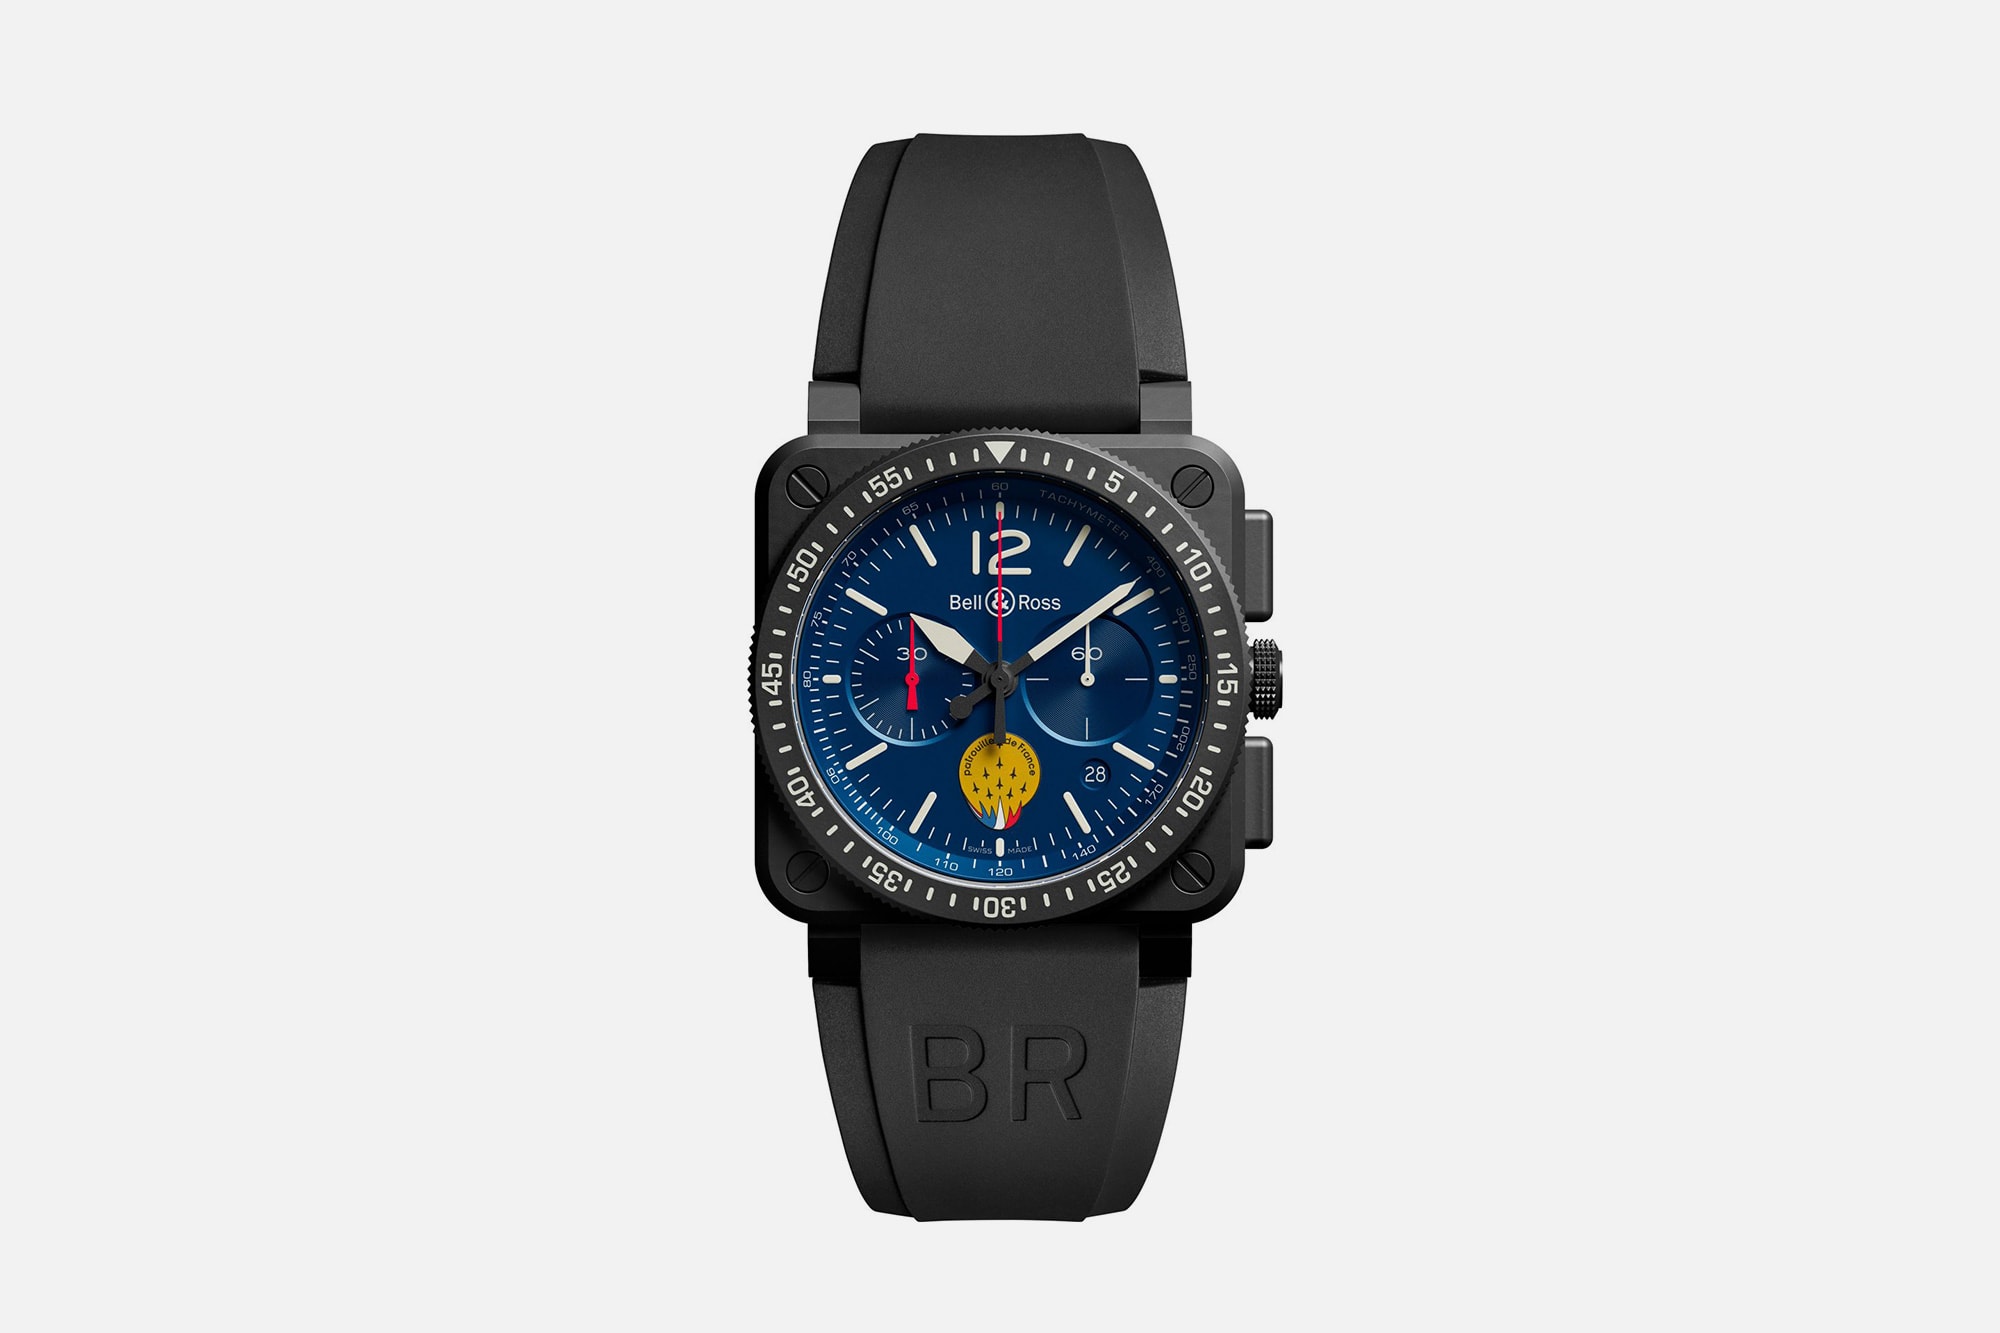 Introducing the Bell & Ross BR 03-94 Patrouille de France